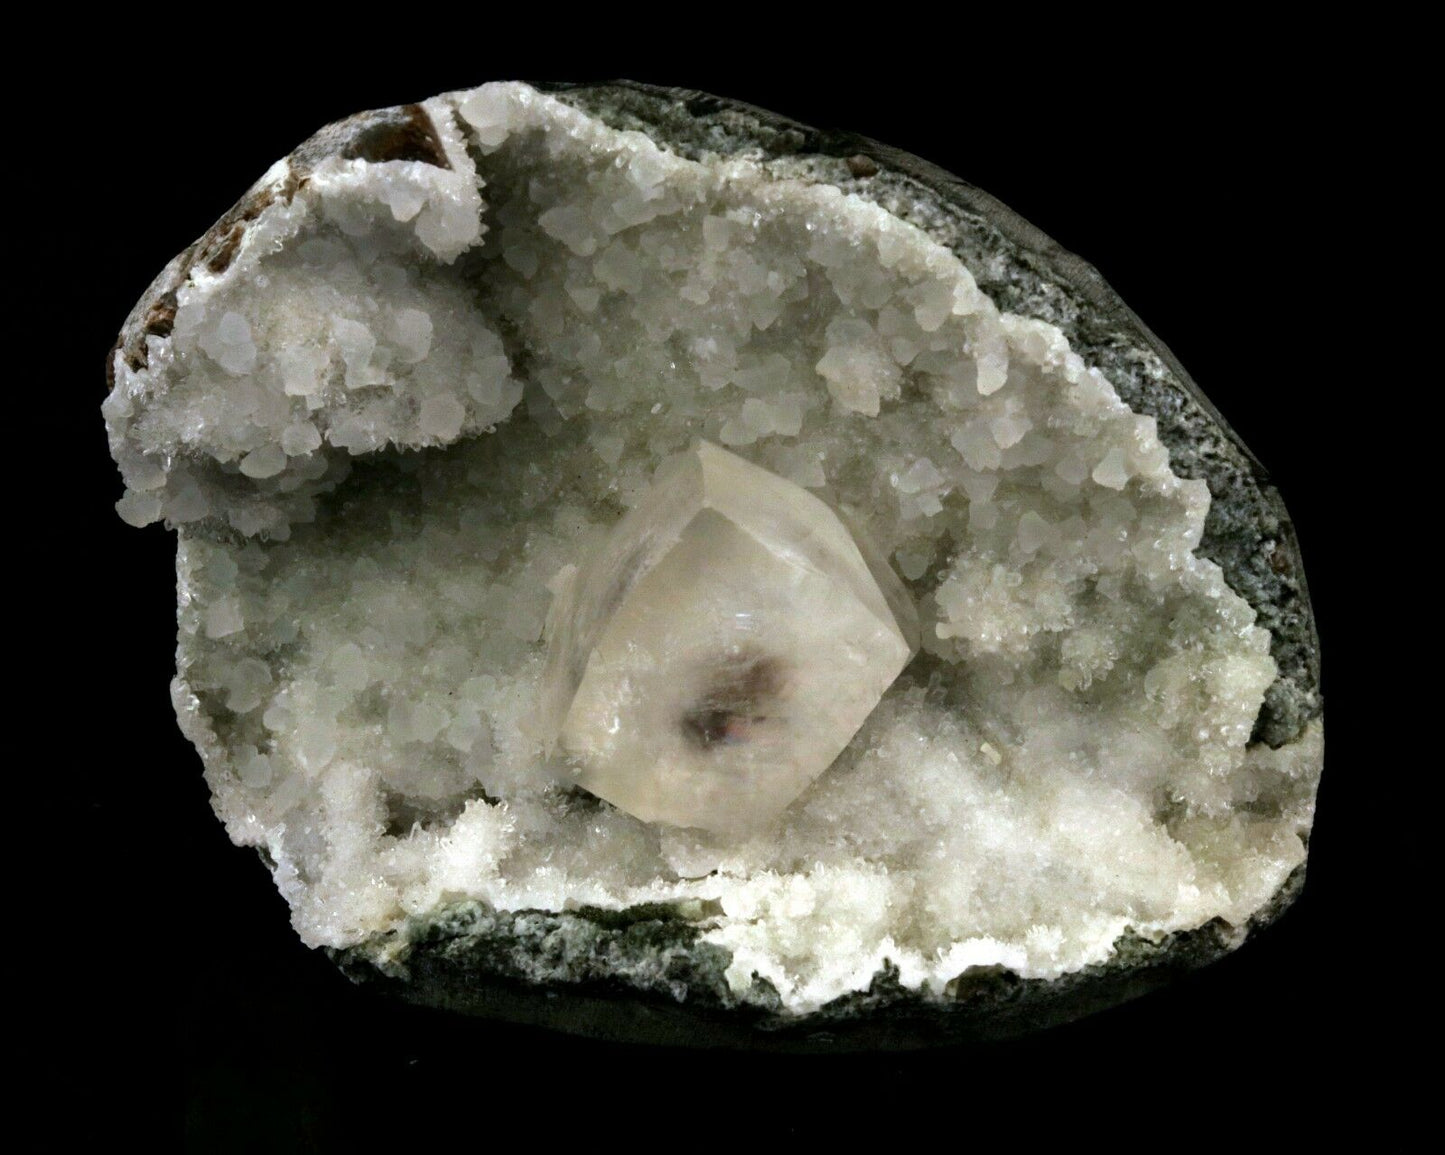 Calcite Cube inside MM Quartz Geode Natural Minerals Specimen # B 2490  https://www.superbminerals.us/products/calcite-cube-inside-mm-quartz-geode-natural-minerals-specimen-b-2490  Features: This is a superb piece that features an exceptionally large Geode lined with lustrous, colorless microcrystalline MM Quartz and MM Quartz hosting one large, translucent Calcite cube. The cube is flawless the result of being protected within a Geode and are perfectly positioned to give the piece outstanding